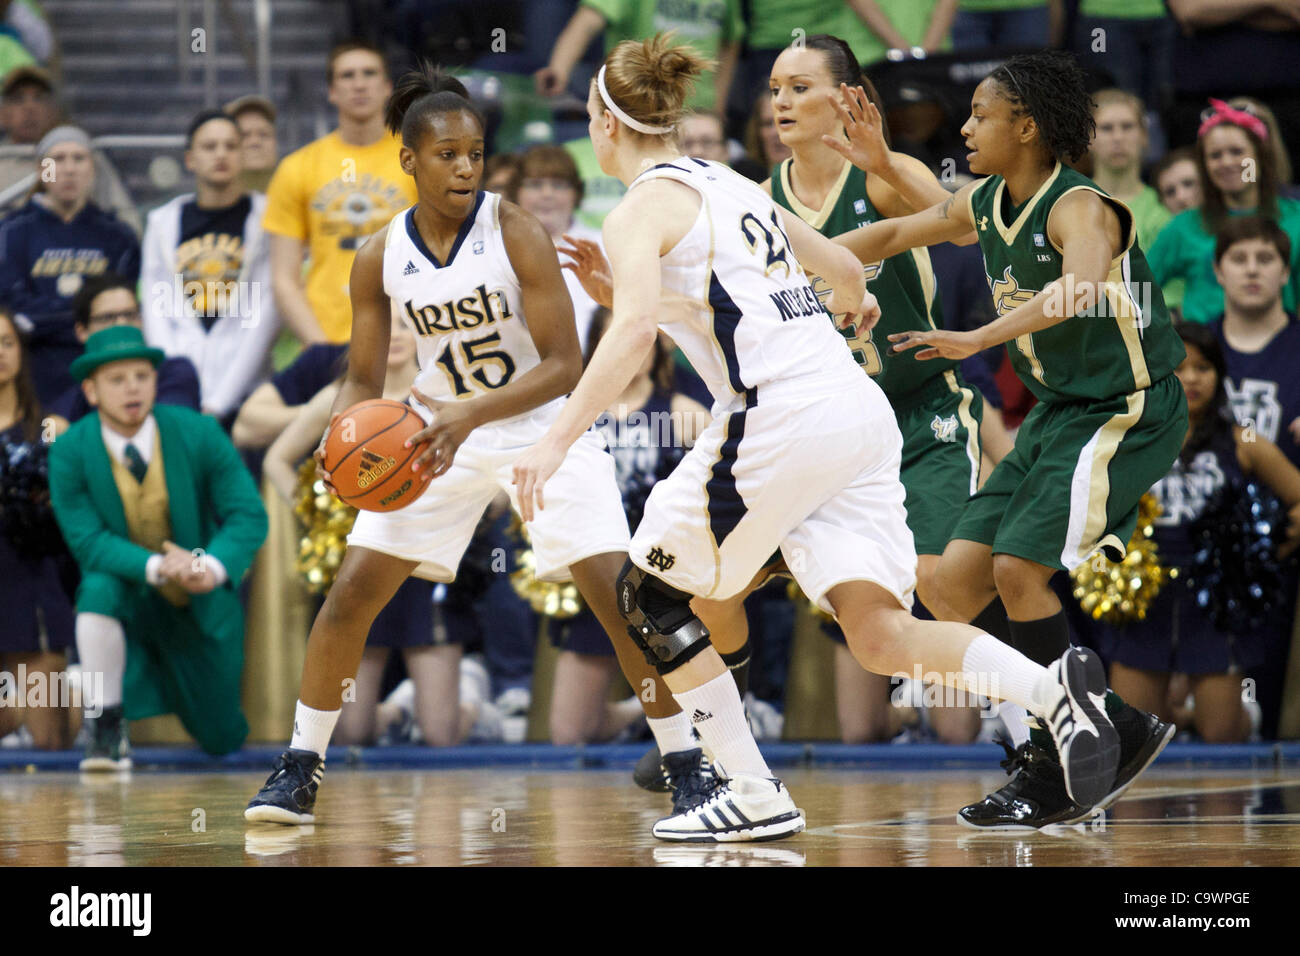 Feb. 25, 2012 - South Bend, Indiana, U.S - Notre Dame guard Kaila Turner (#15) looks to pass the ball to guard Natalie Novosel (#21) in first half action of NCAA Women's basketball game between South Florida and Notre Dame.  The Notre Dame Fighting Irish defeated the South Florida Bulls 80-68 in gam Stock Photo